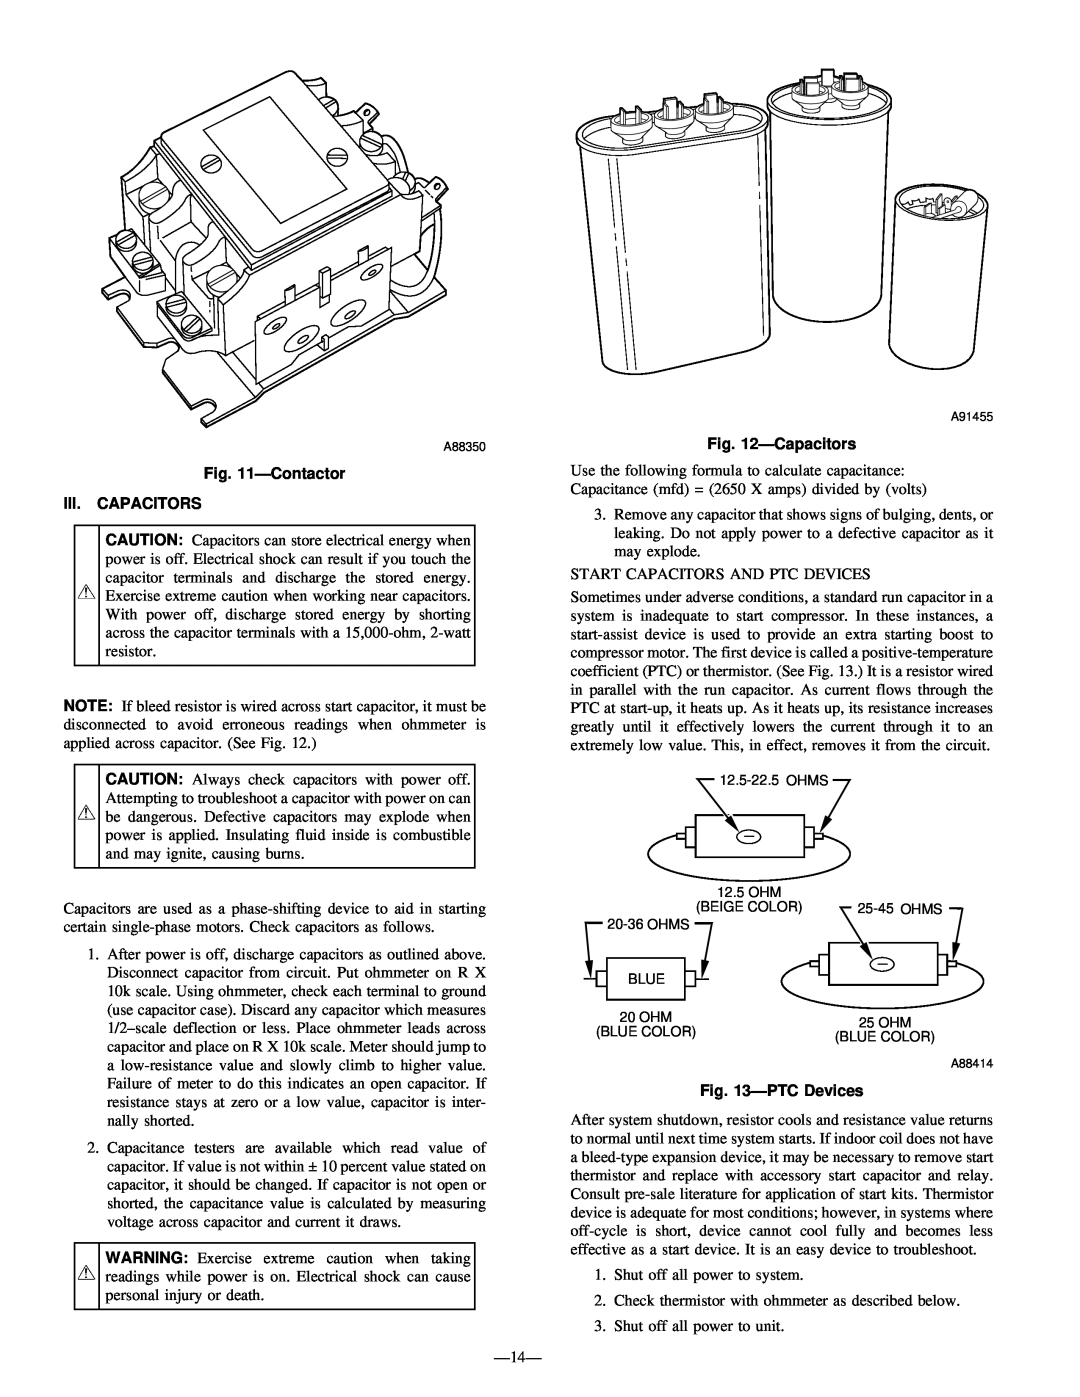 Bryant R-22 service manual Contactor III. CAPACITORS, Capacitors, PTCDevices 